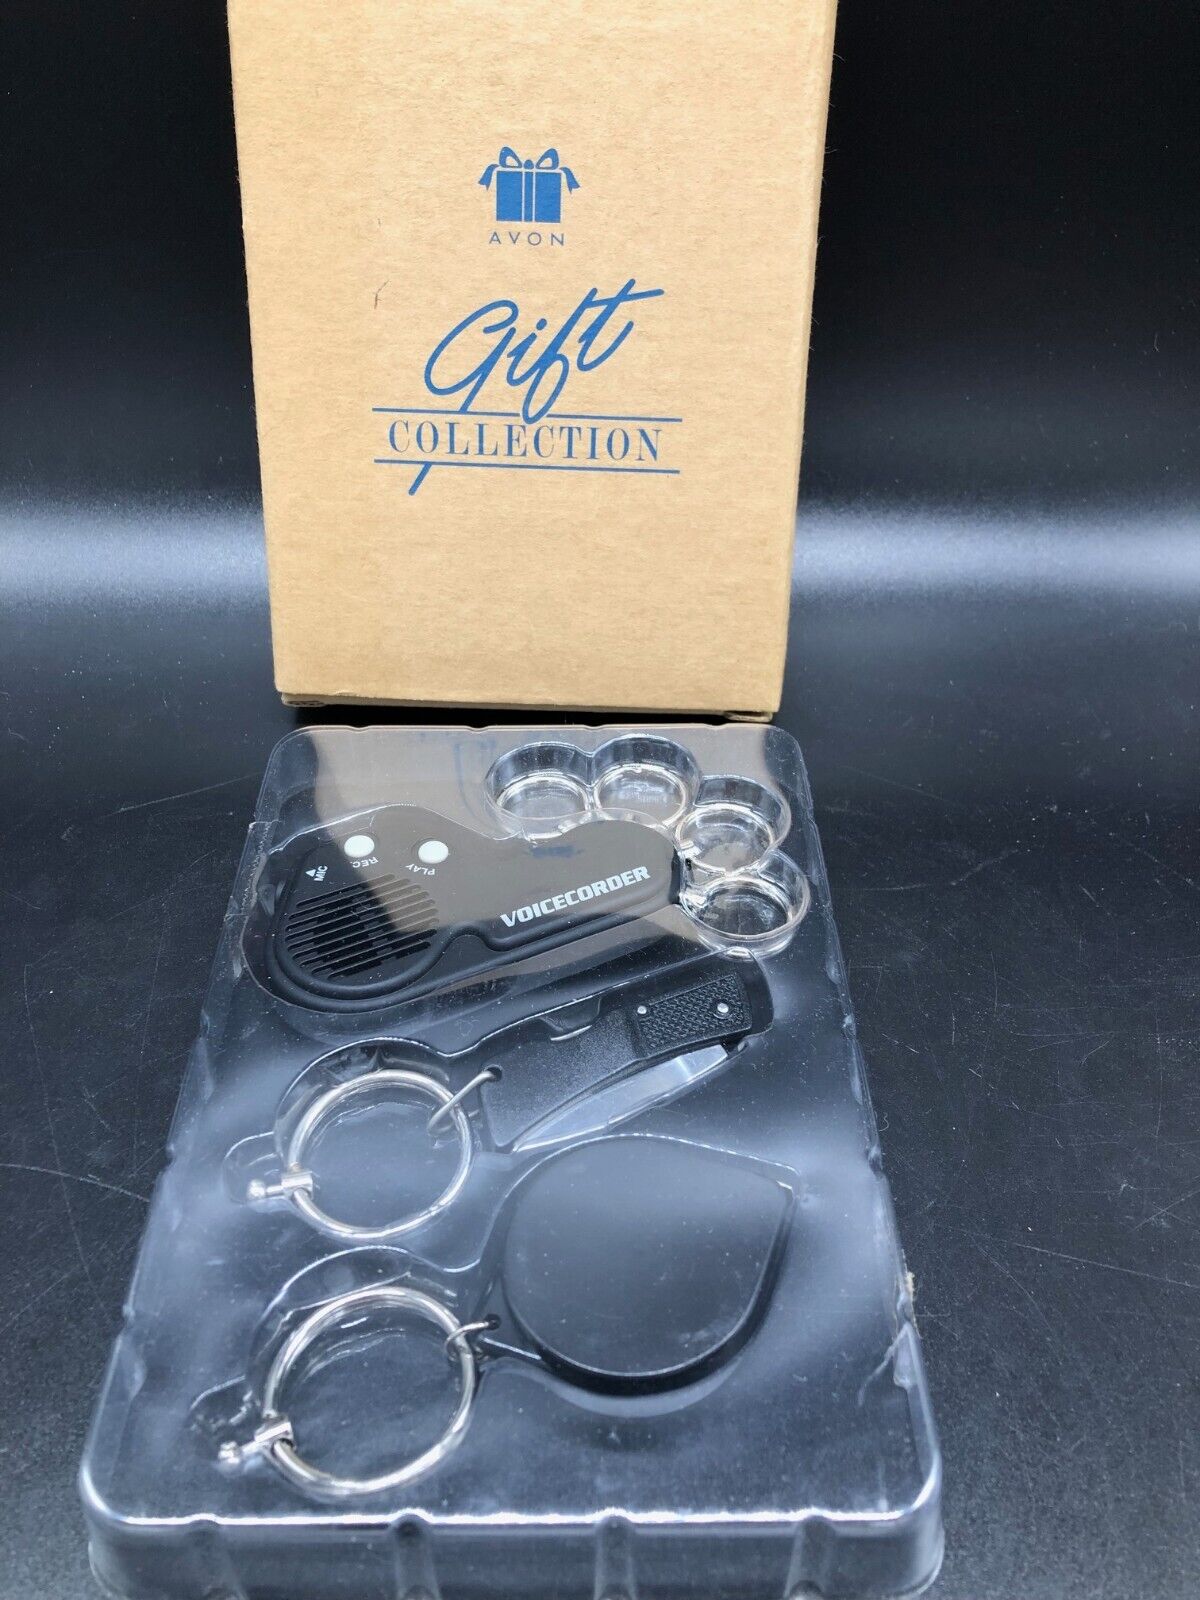 Avon Gift Collection Includes Digital Recorder Mini Knife and Keyrings, NIB